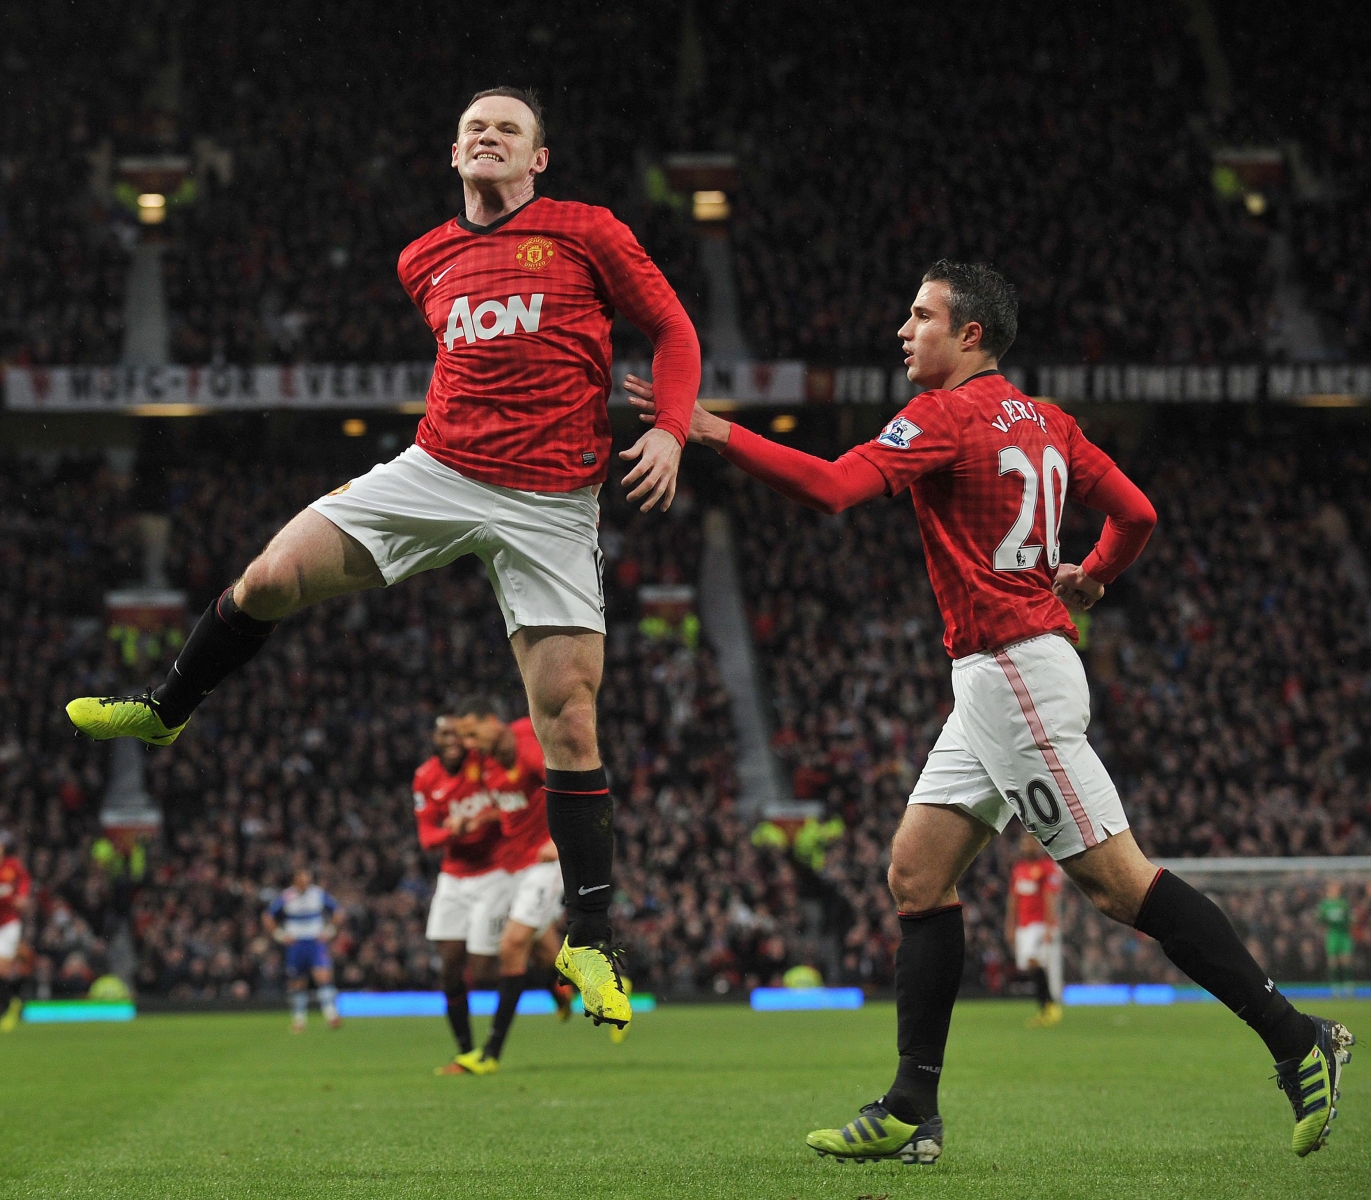 Wayne Rooney (L) of Manchester United celebrates his goal which makes the game 1-0 to Man Utd during the English Premier League soccer match between Manchester United and Reading at Old Trafford, Britain, 16 March 2013.  EPA/DAVID RICHARDS DataCo terms and conditions apply. https://www.epa.eu/downloads/DataCo-TCs.pdf